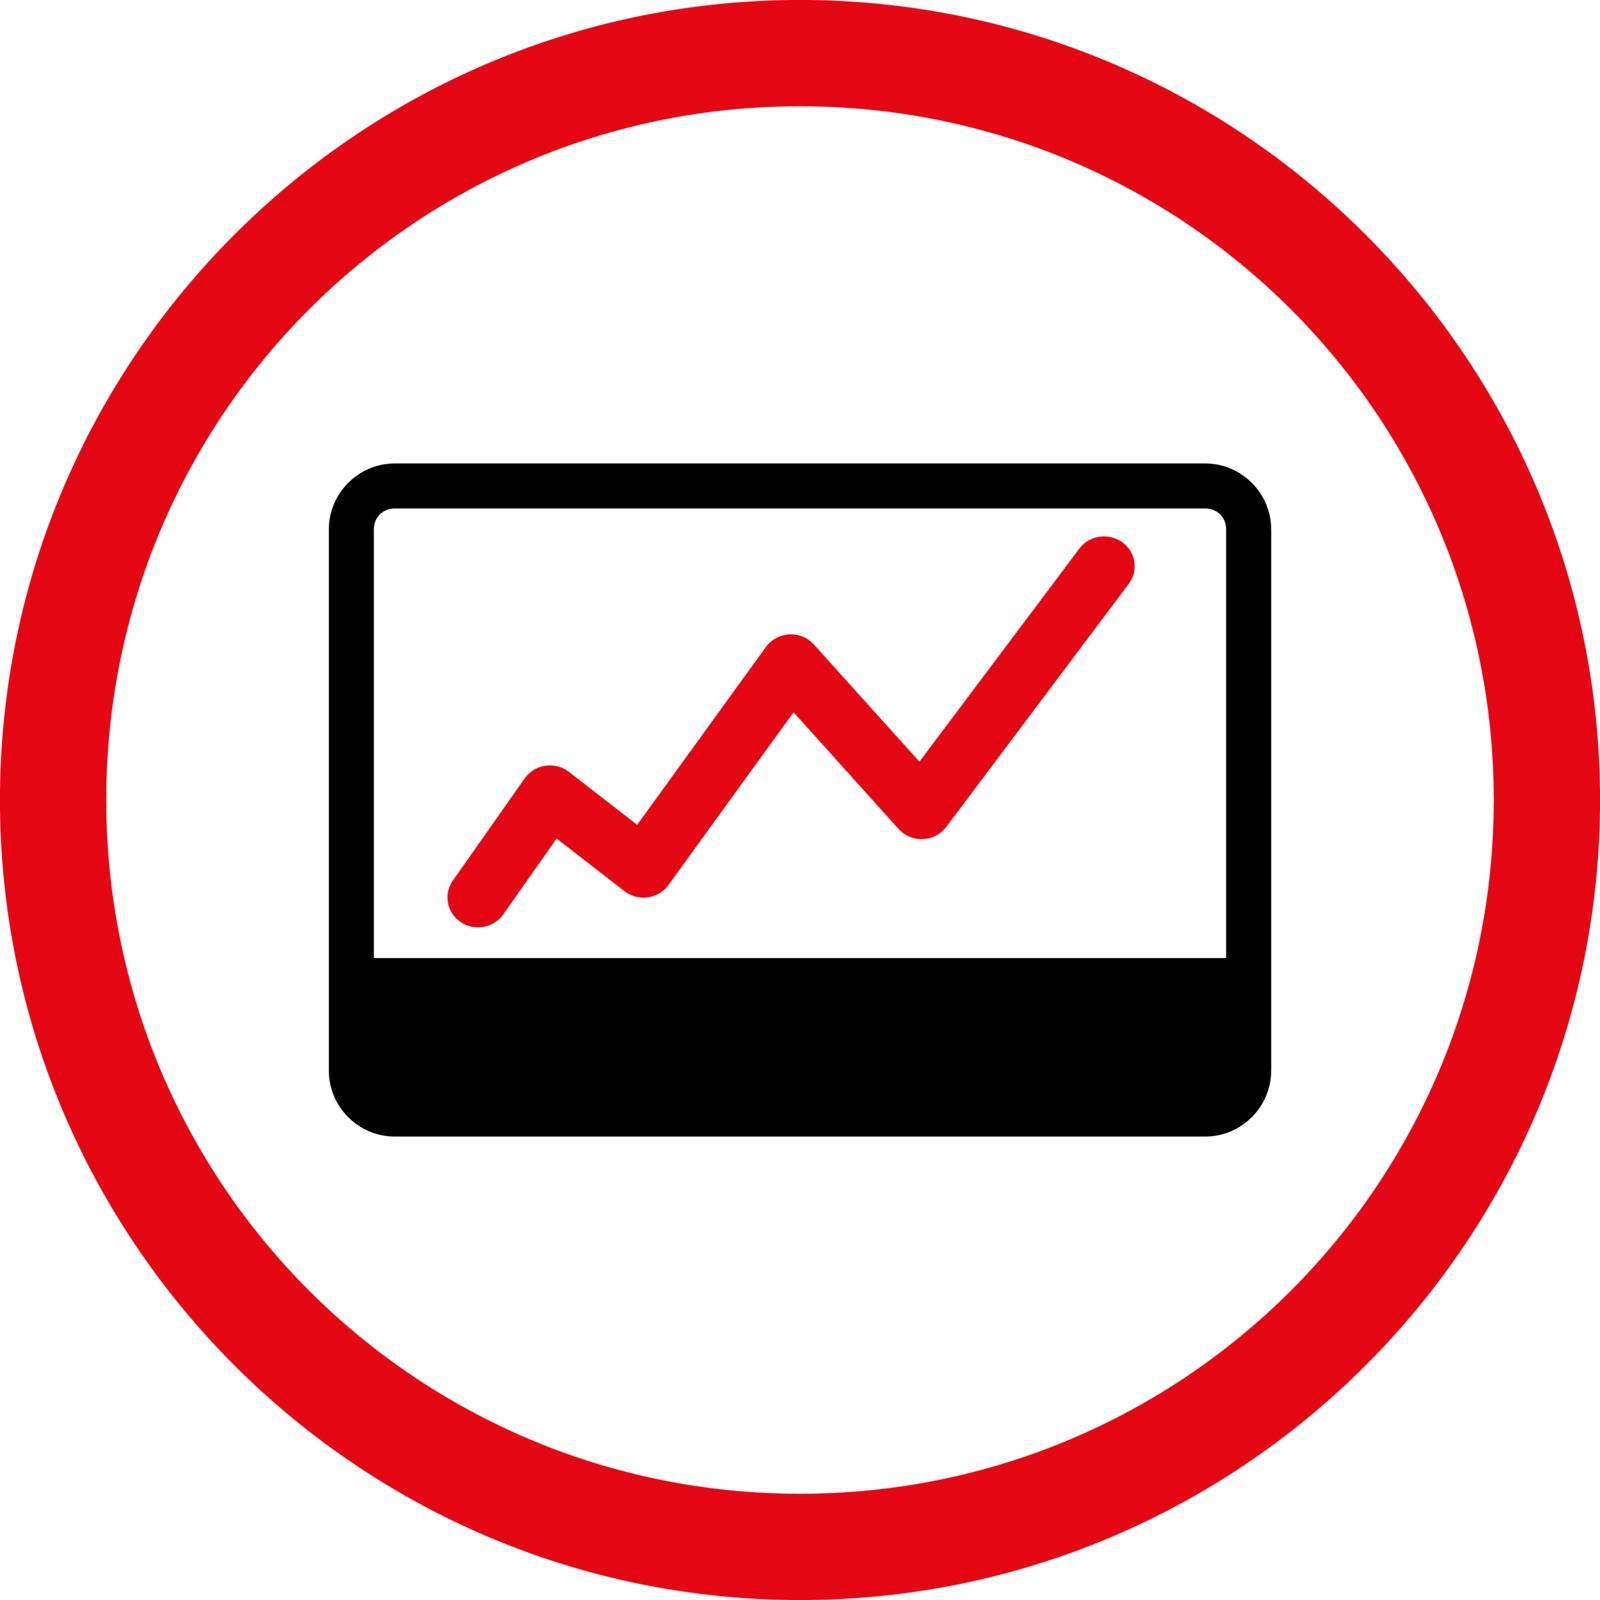 Stock Market vector icon. This flat rounded symbol uses intensive red and black colors and isolated on a white background.